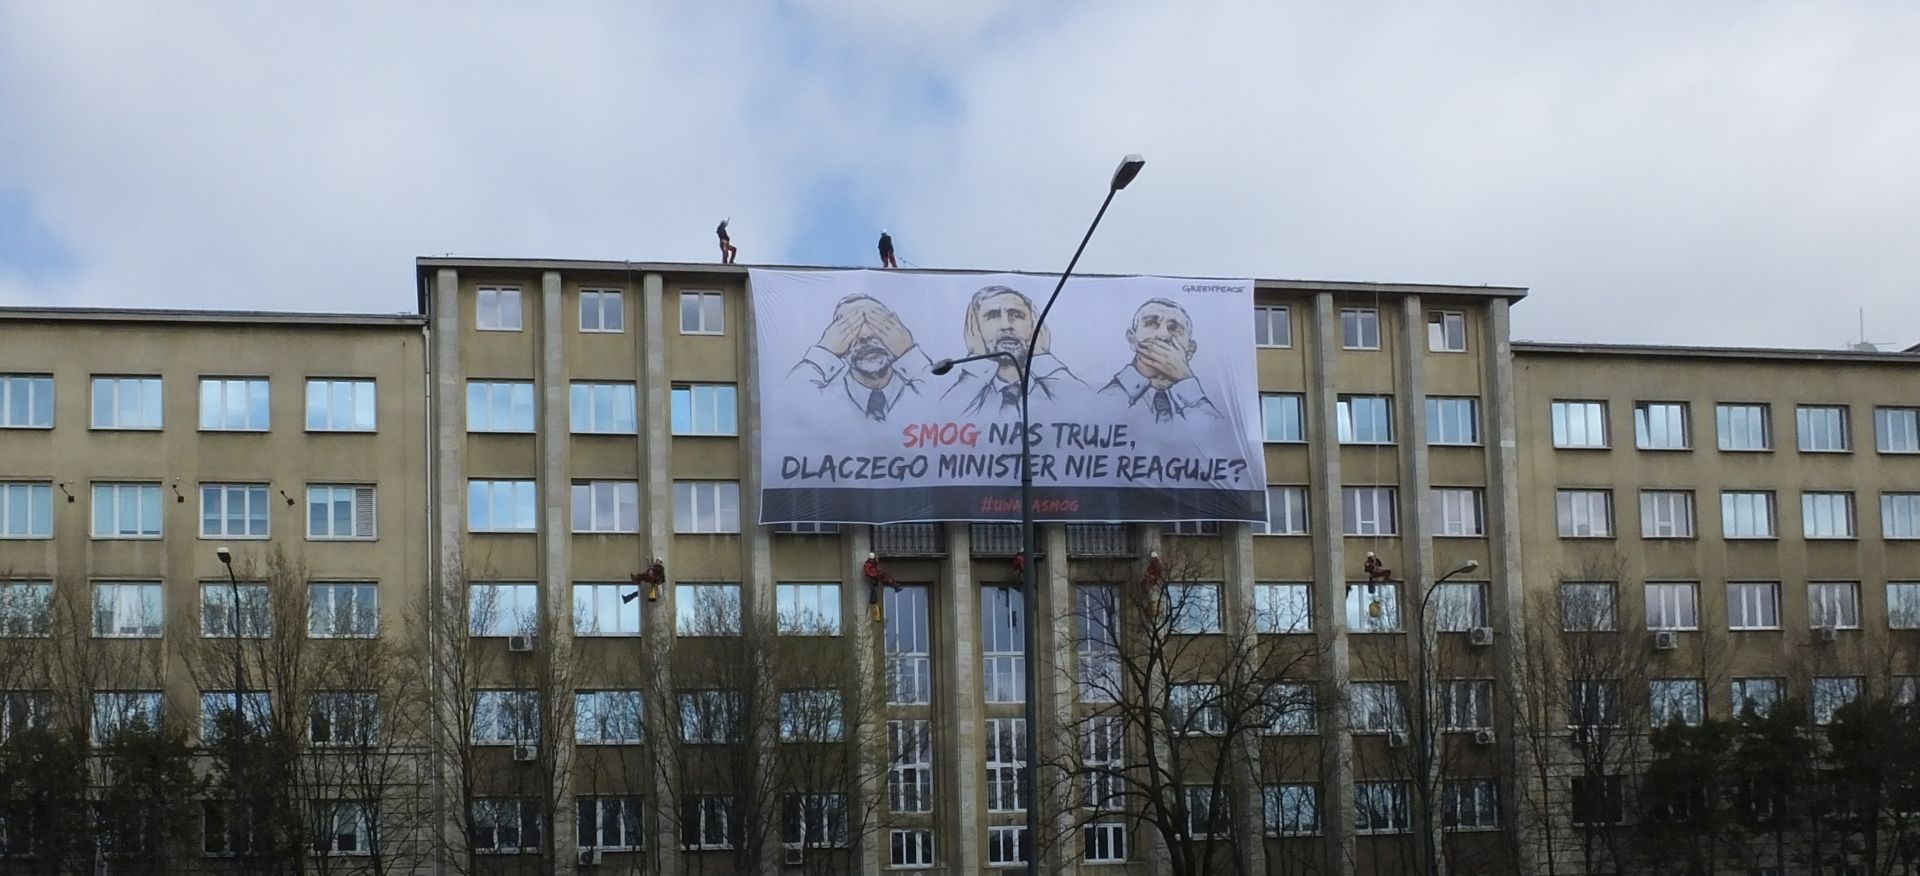 greenpeace action against smog - activists climb a building to hang a banner that says in polish that politicans are ignoring smog)